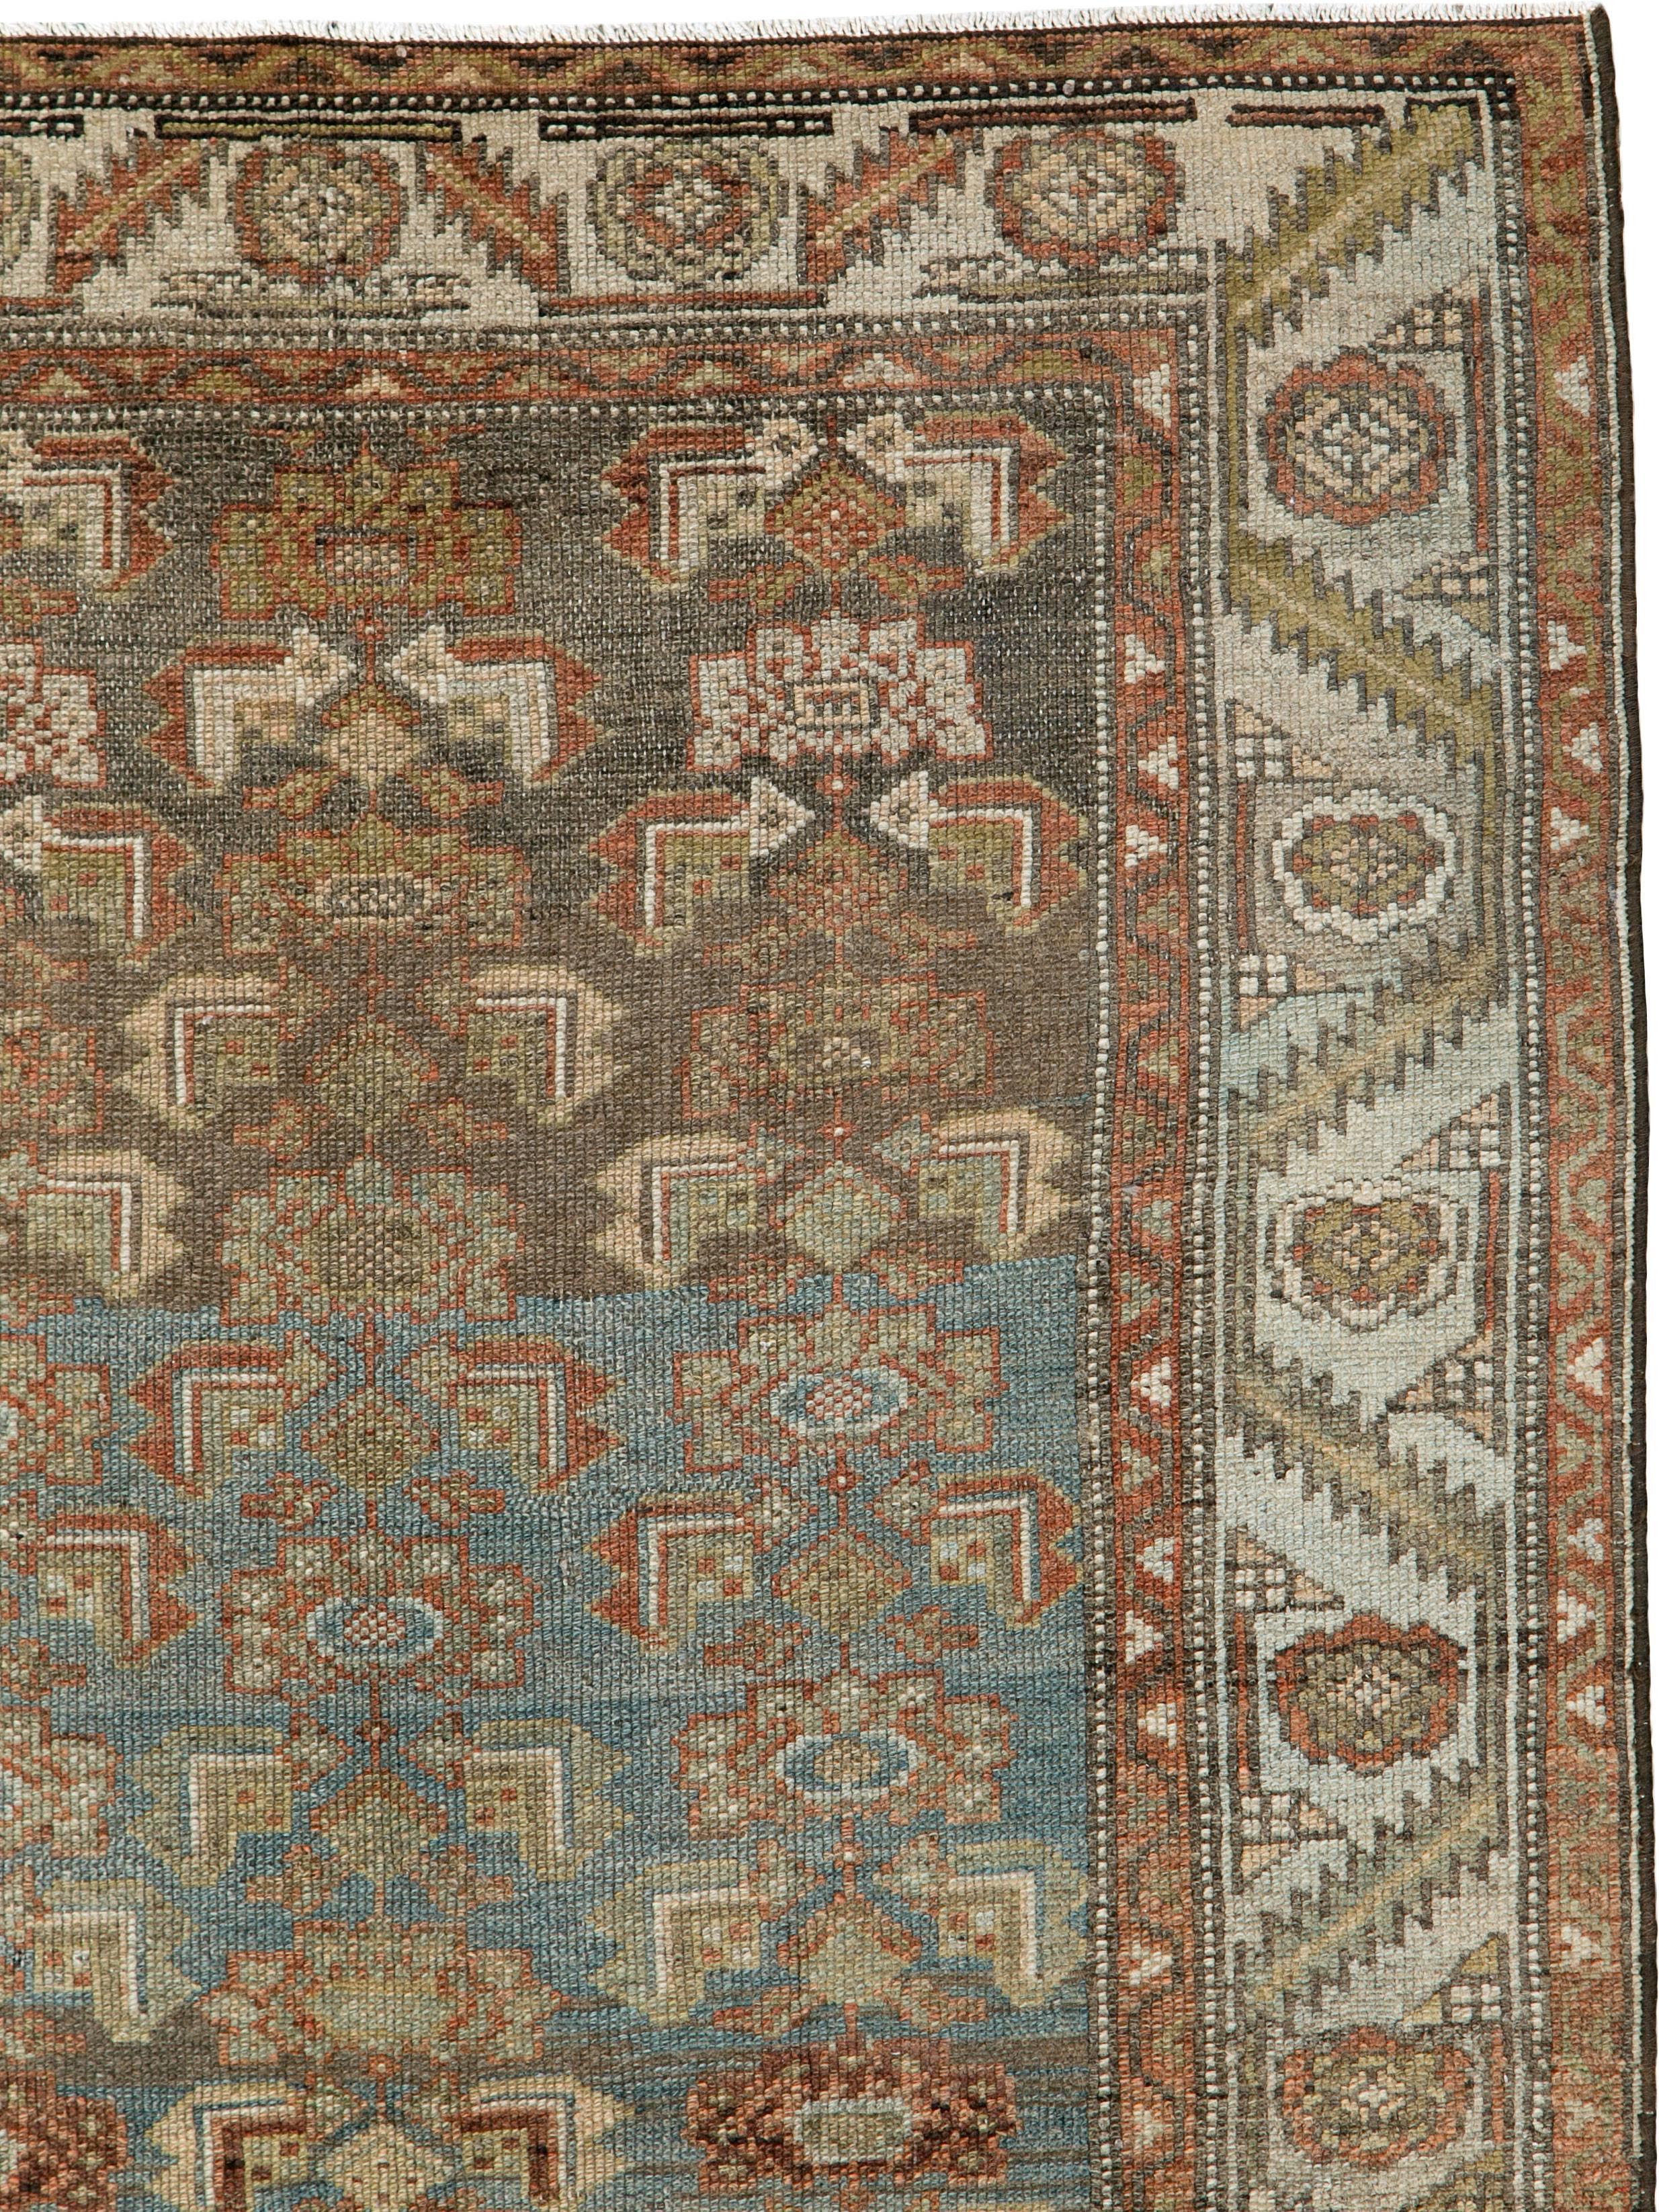 An antique Persian Kurd rug from the first quarter of the 20th century.